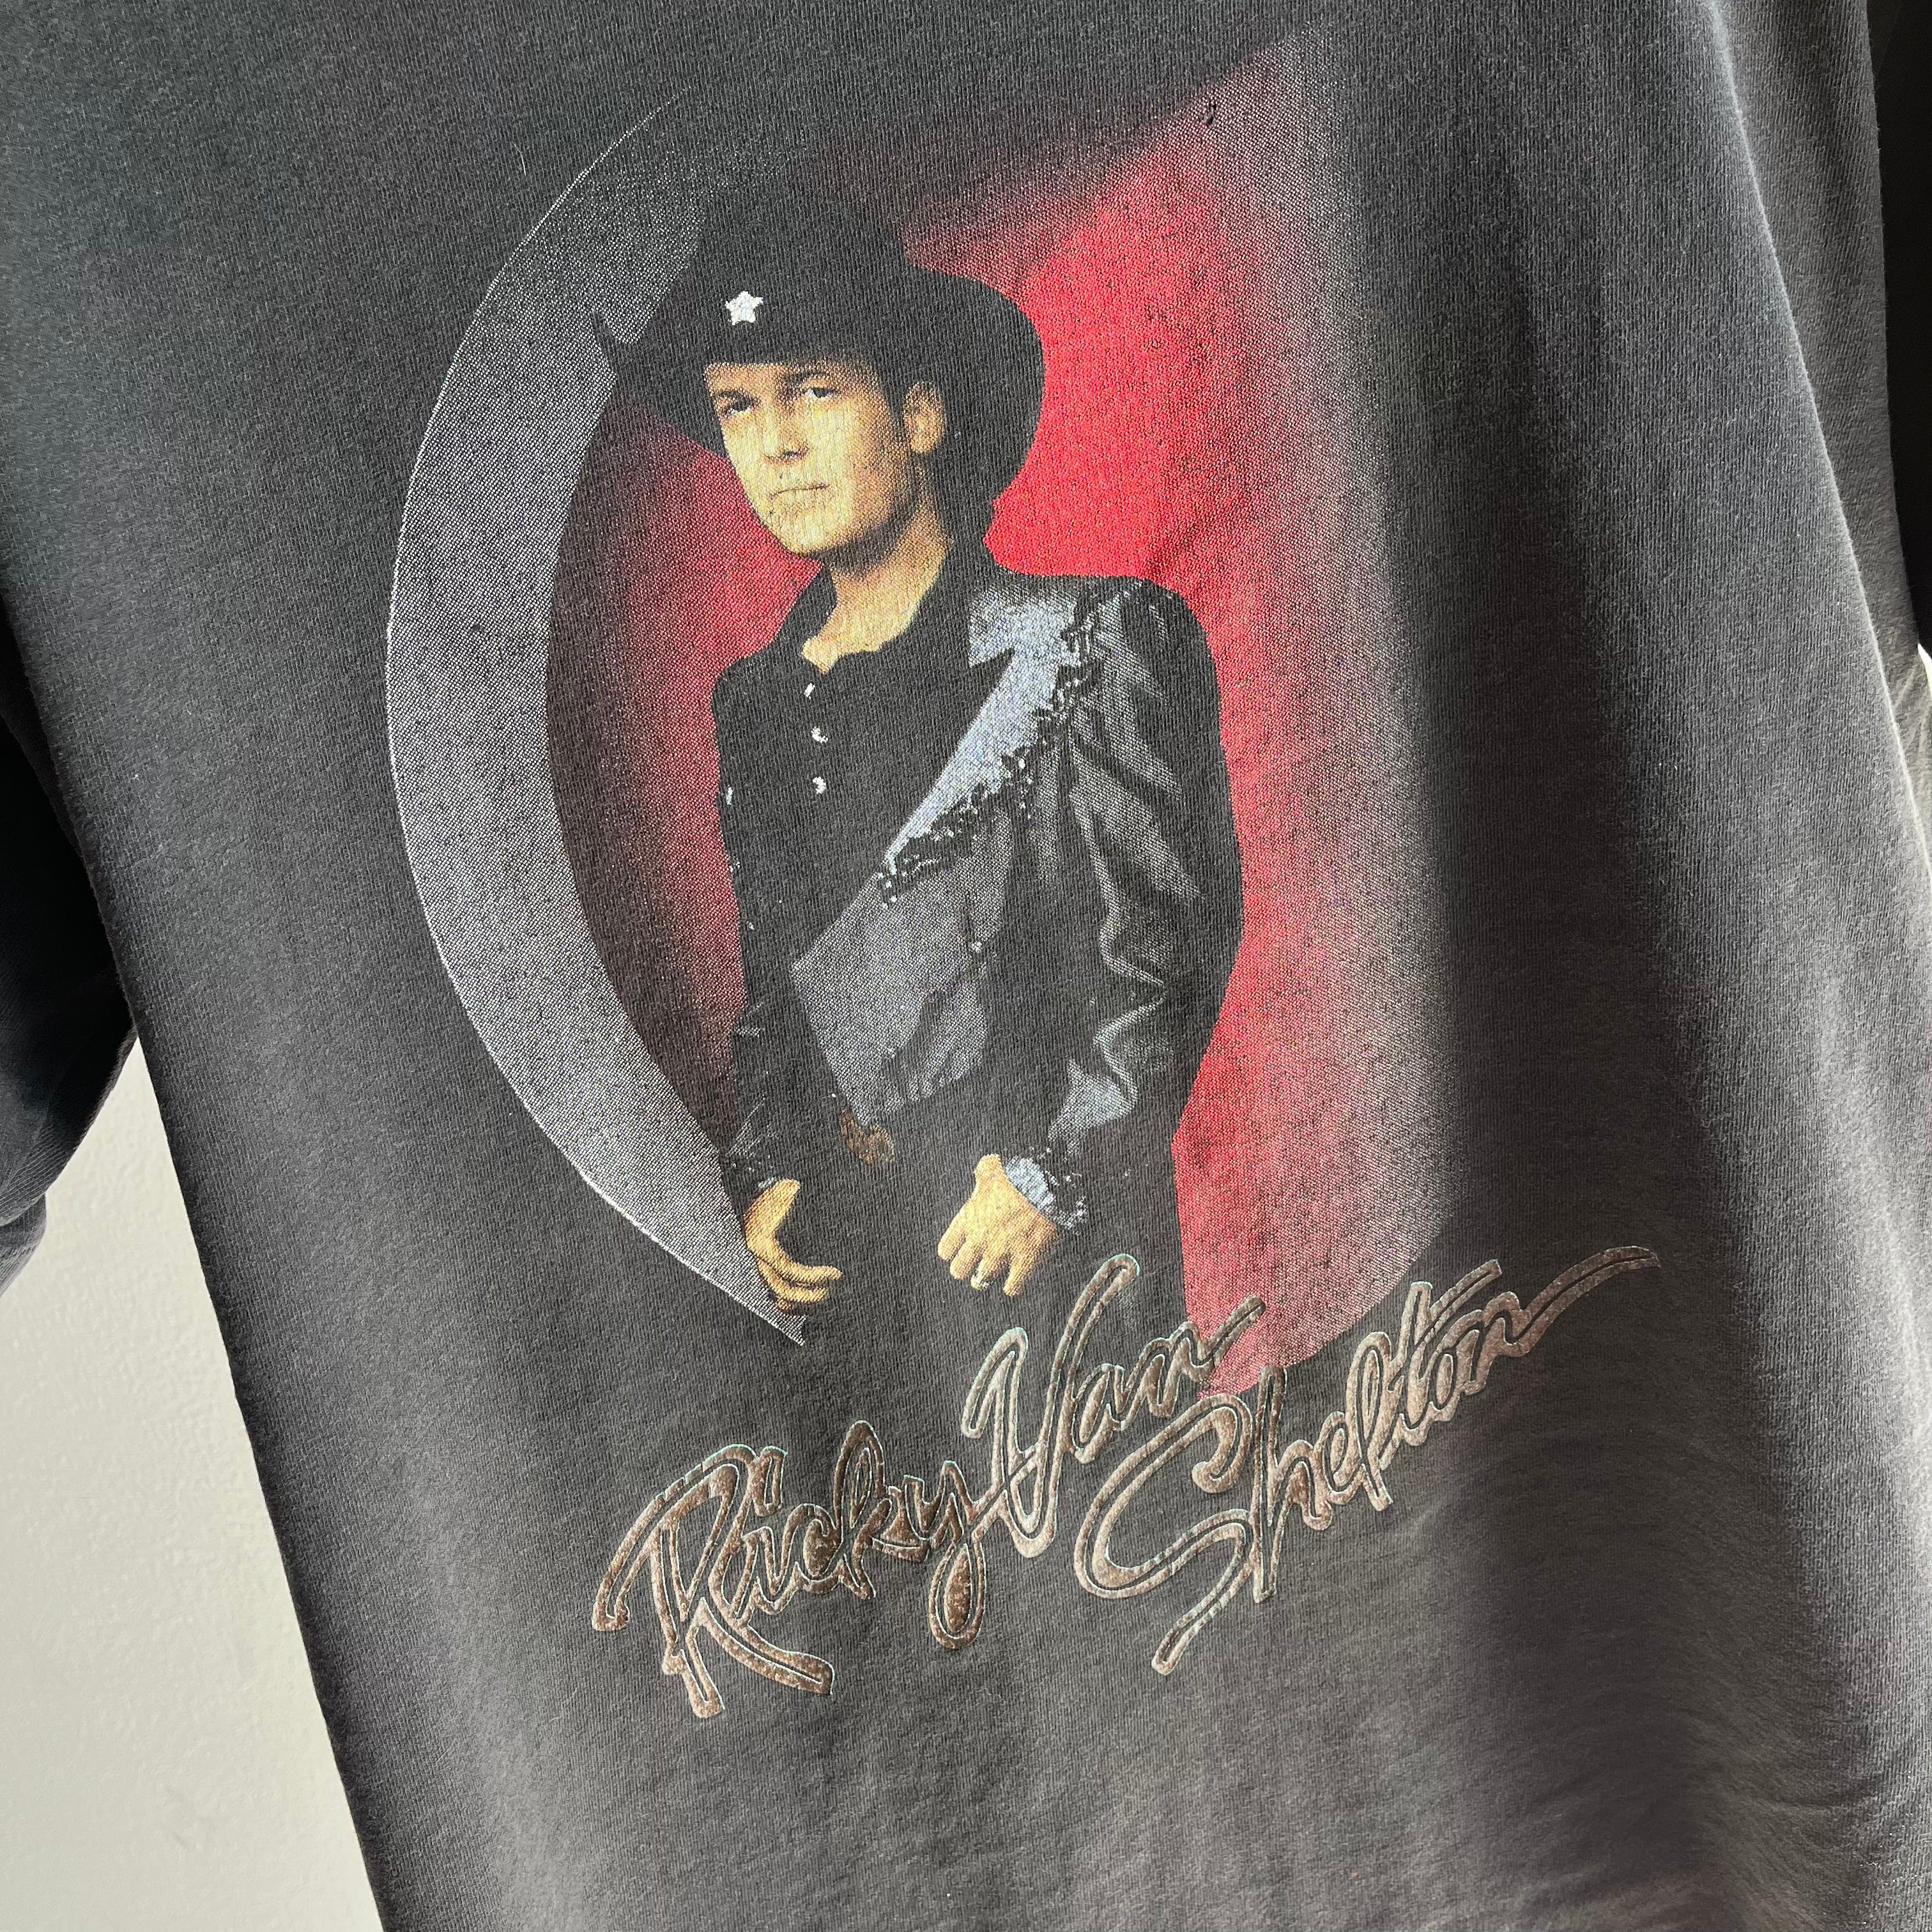 1990 Ricky Van Shelton - Entertainer of the Year - Front and Back T-Shirt